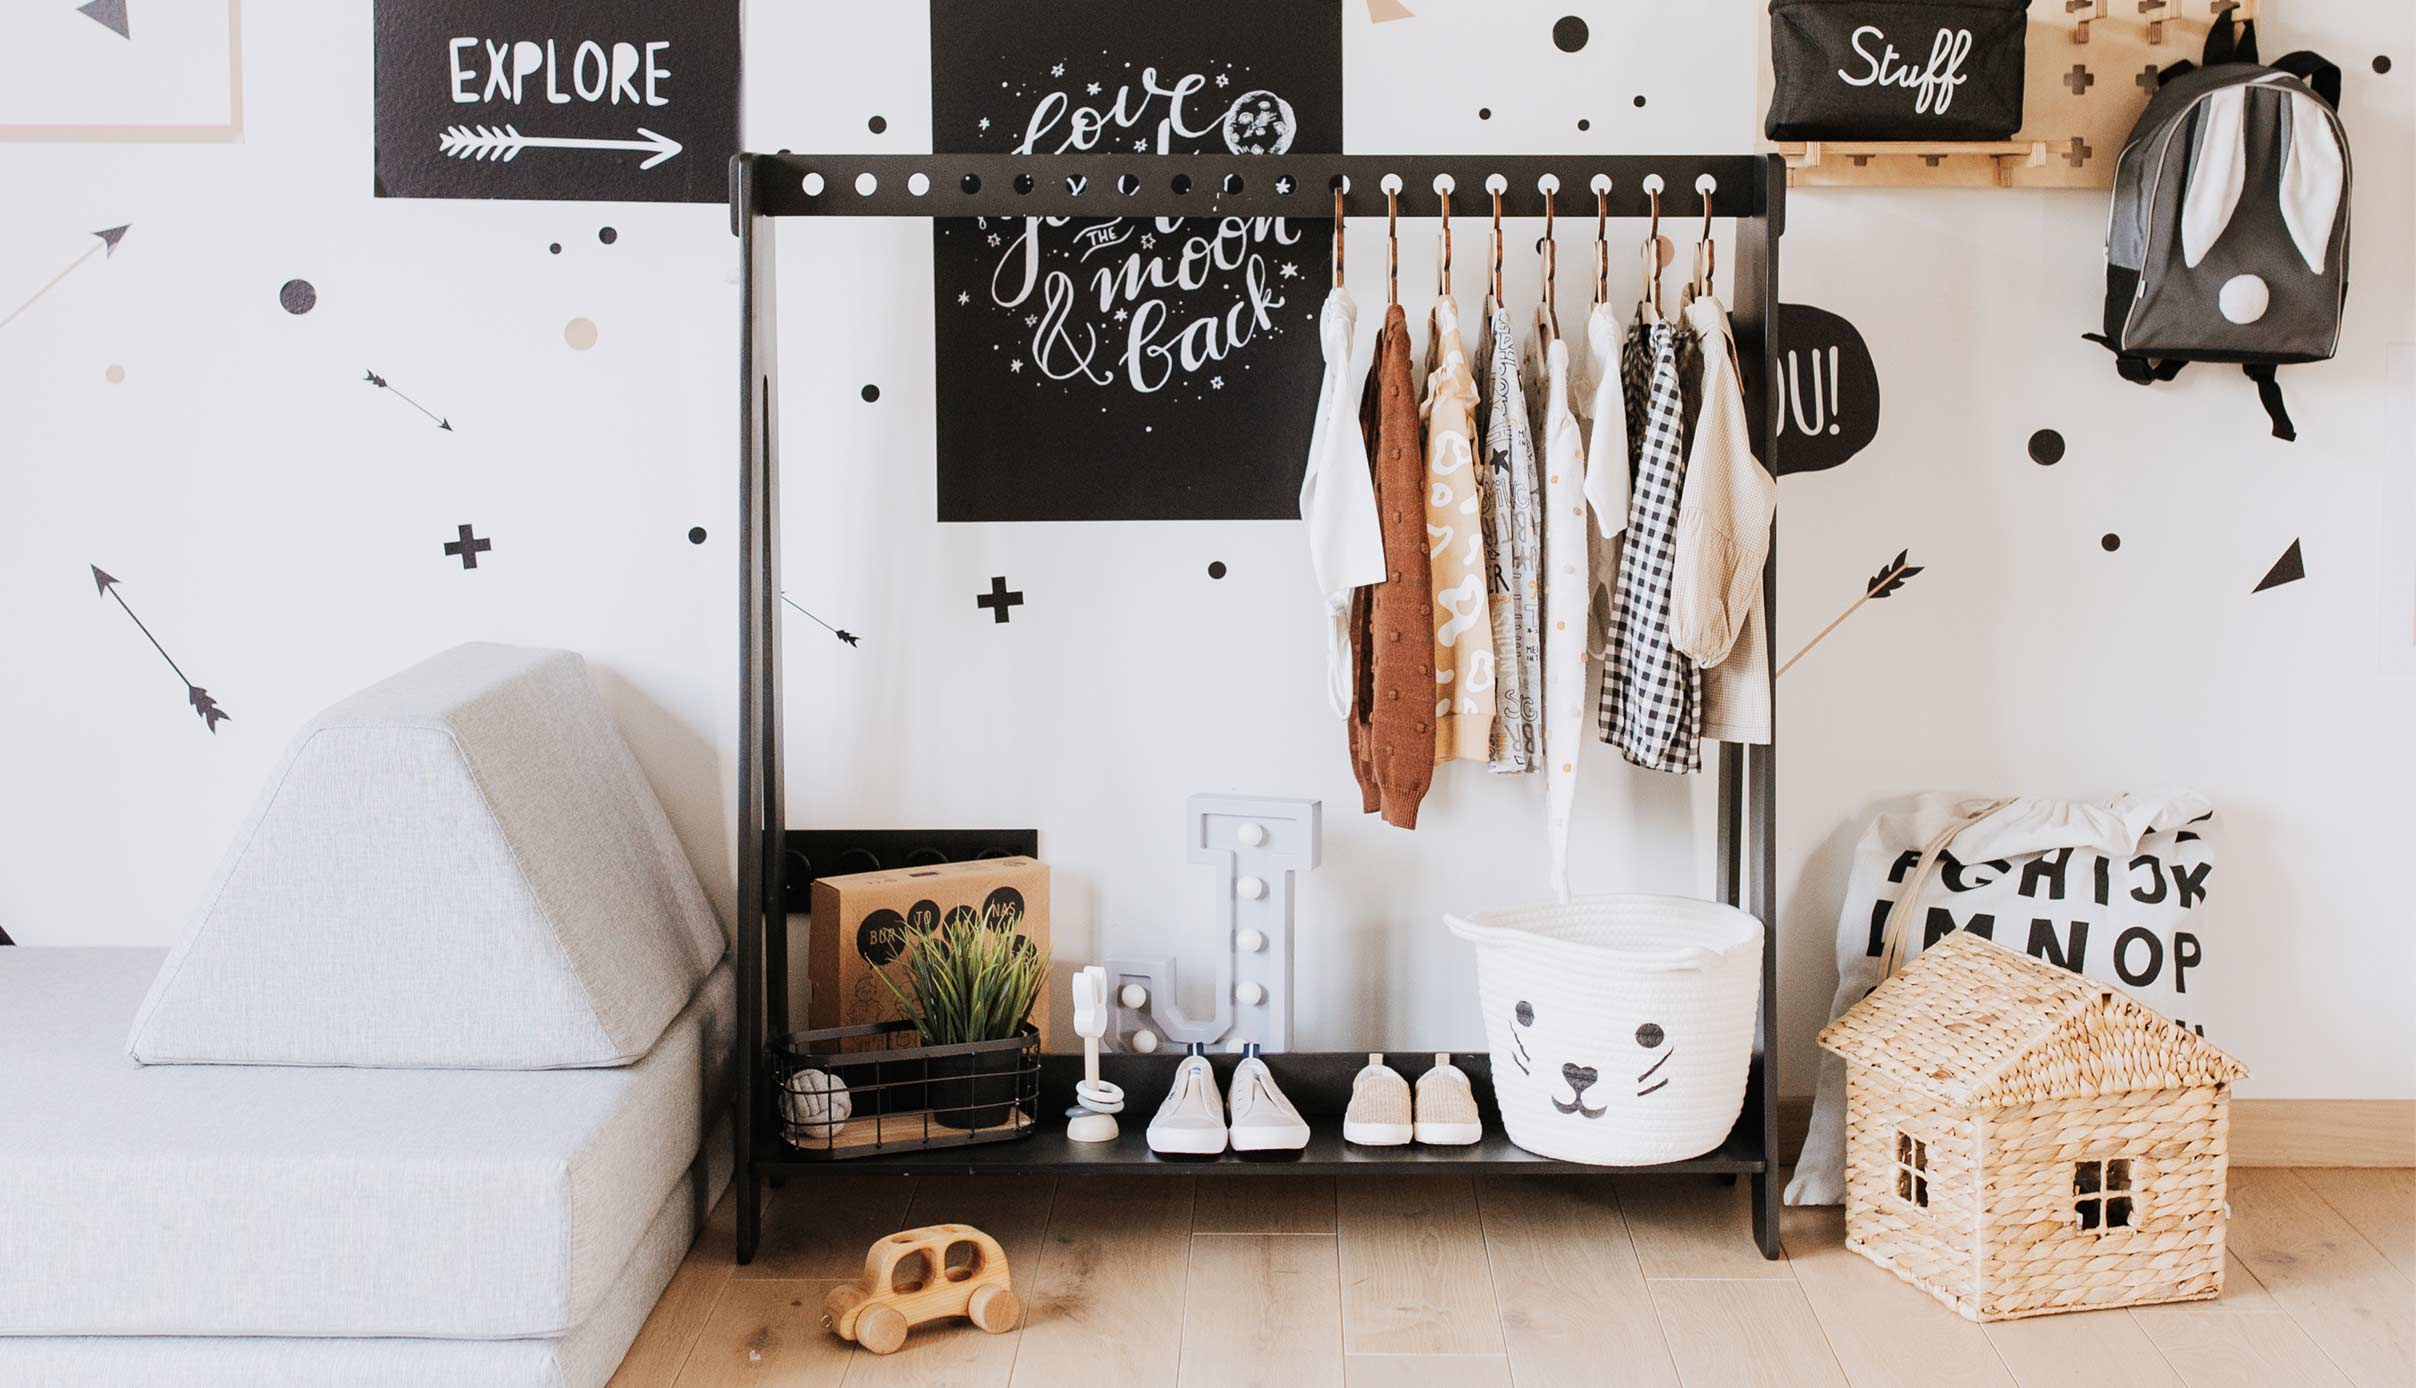 A child's room with a black and white polka dot wall.